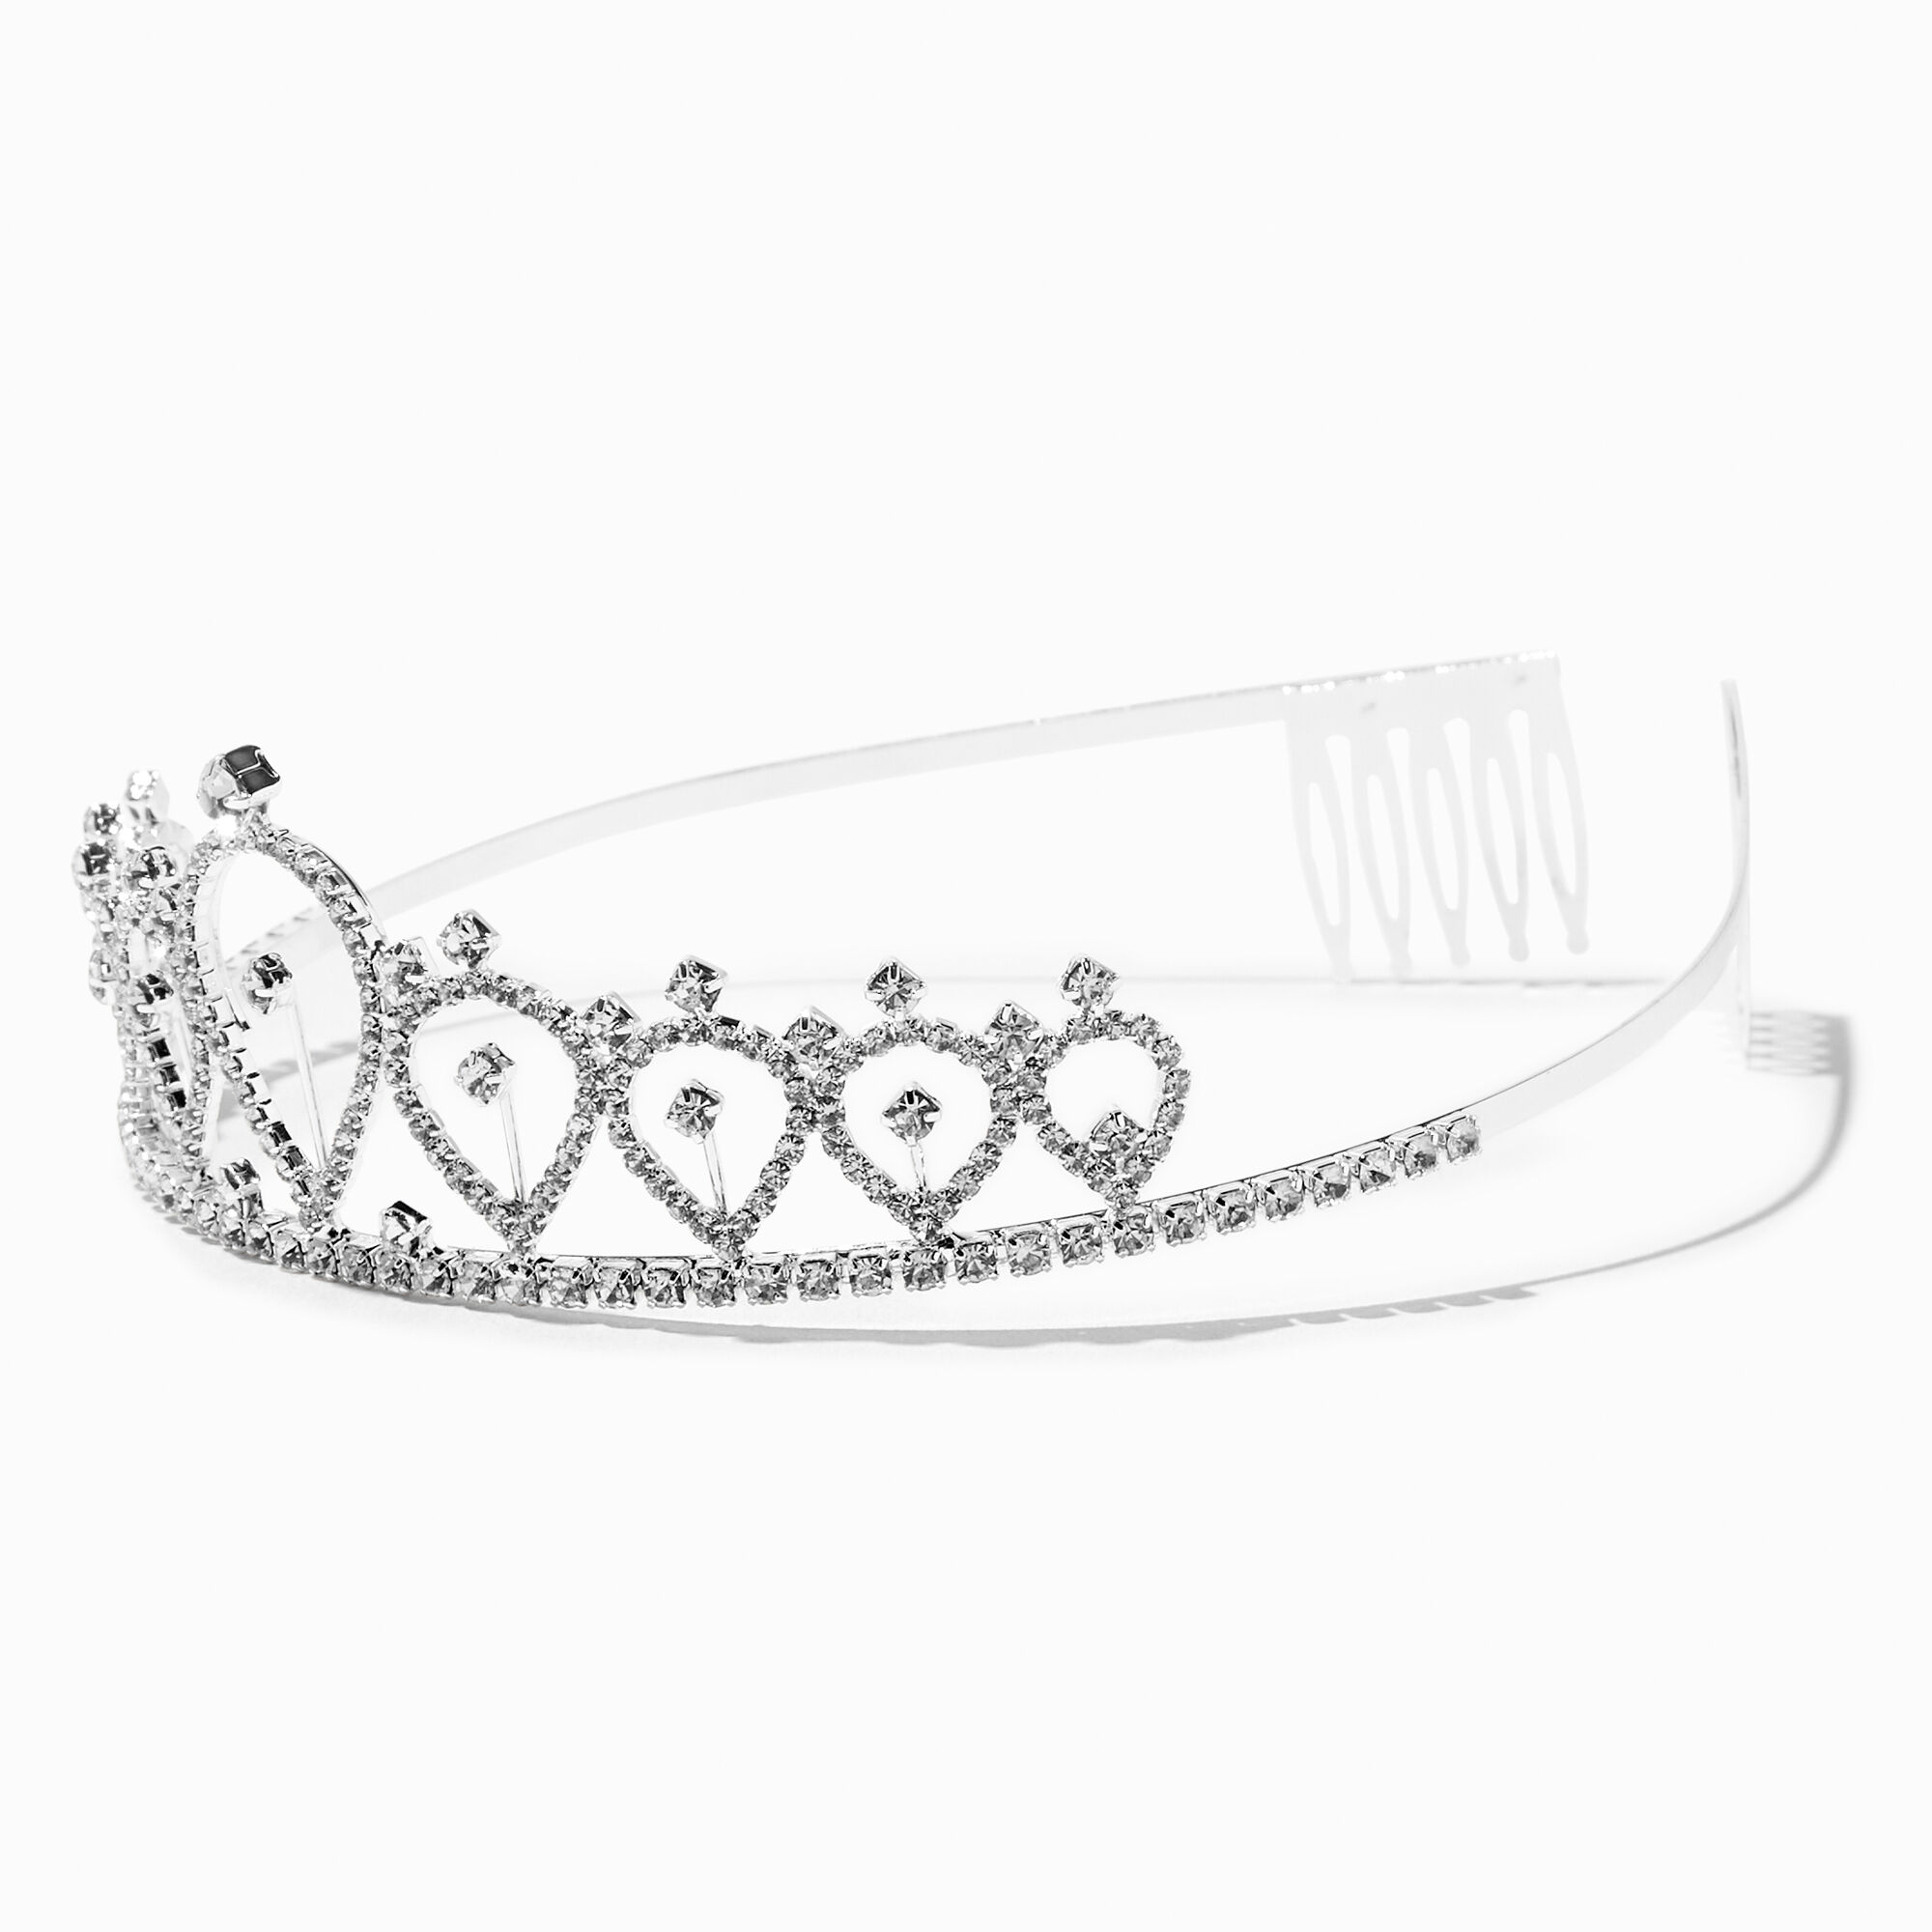 View Claires Tone Rhinestone Candle Tiara Silver information